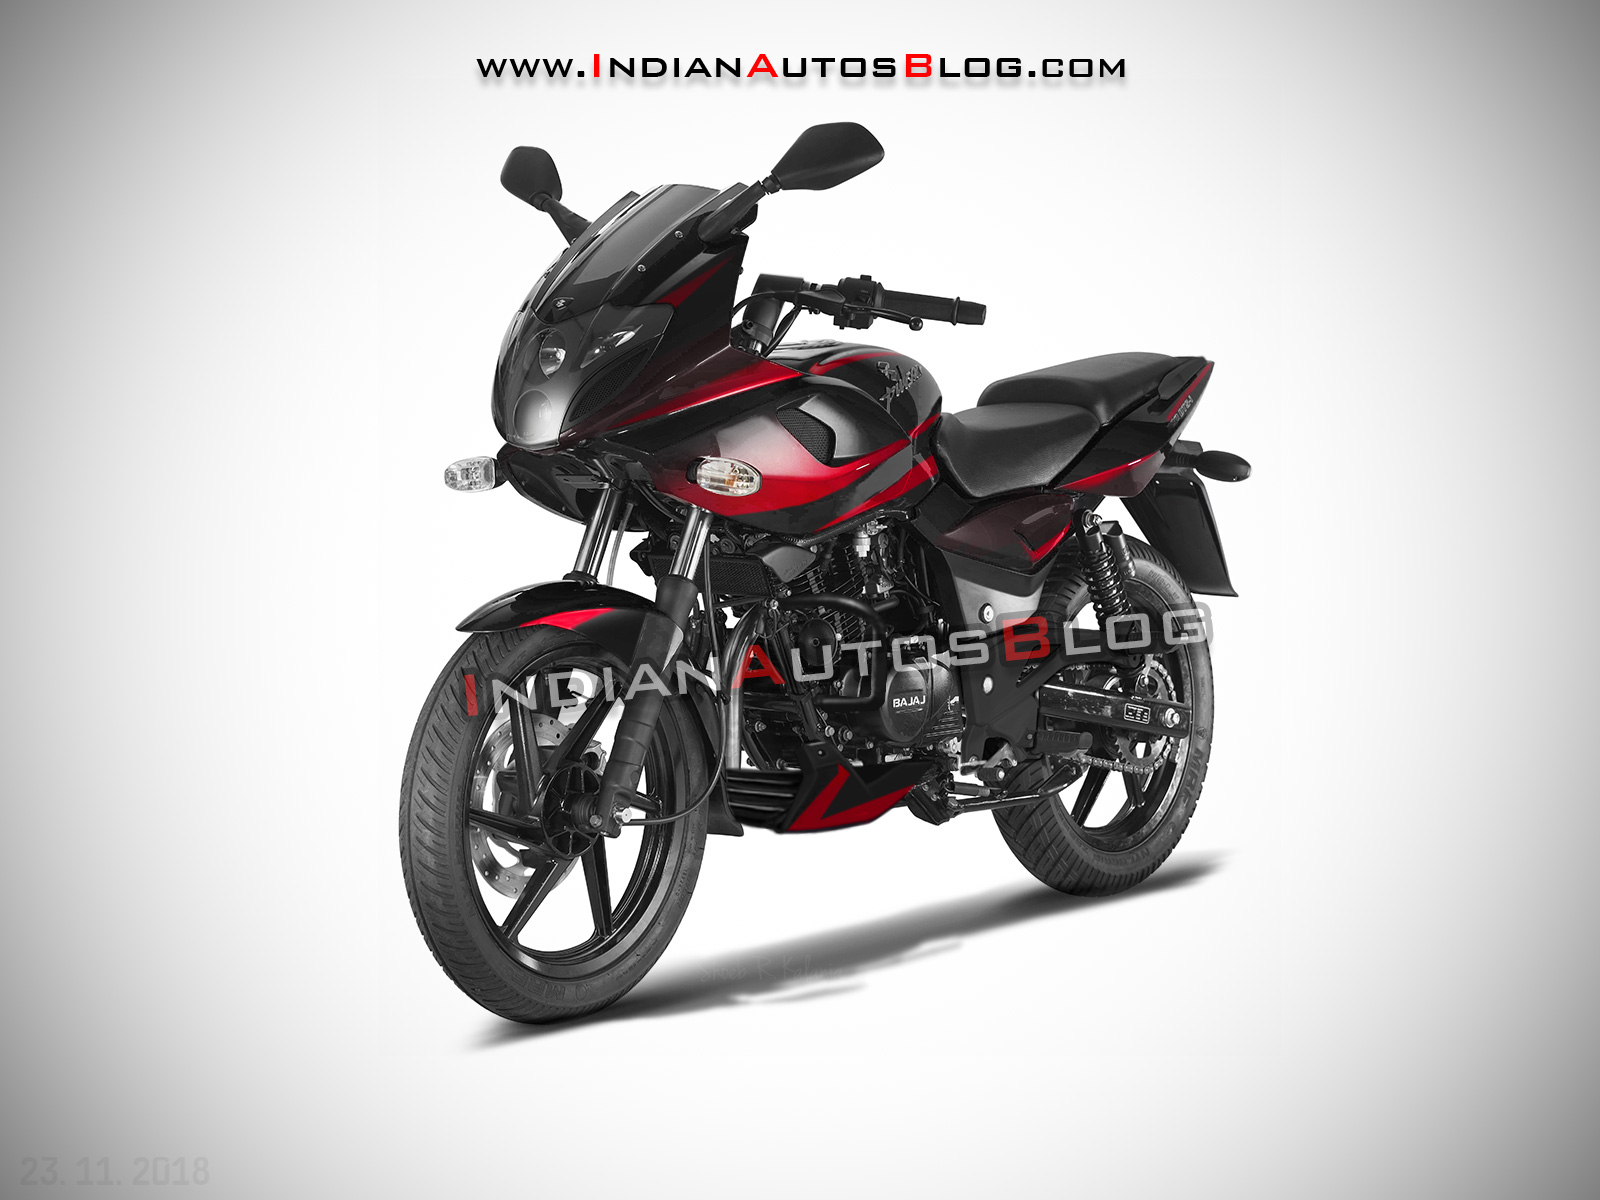 4 Things We Expect To See On The 2019 Bajaj Pulsar 220f